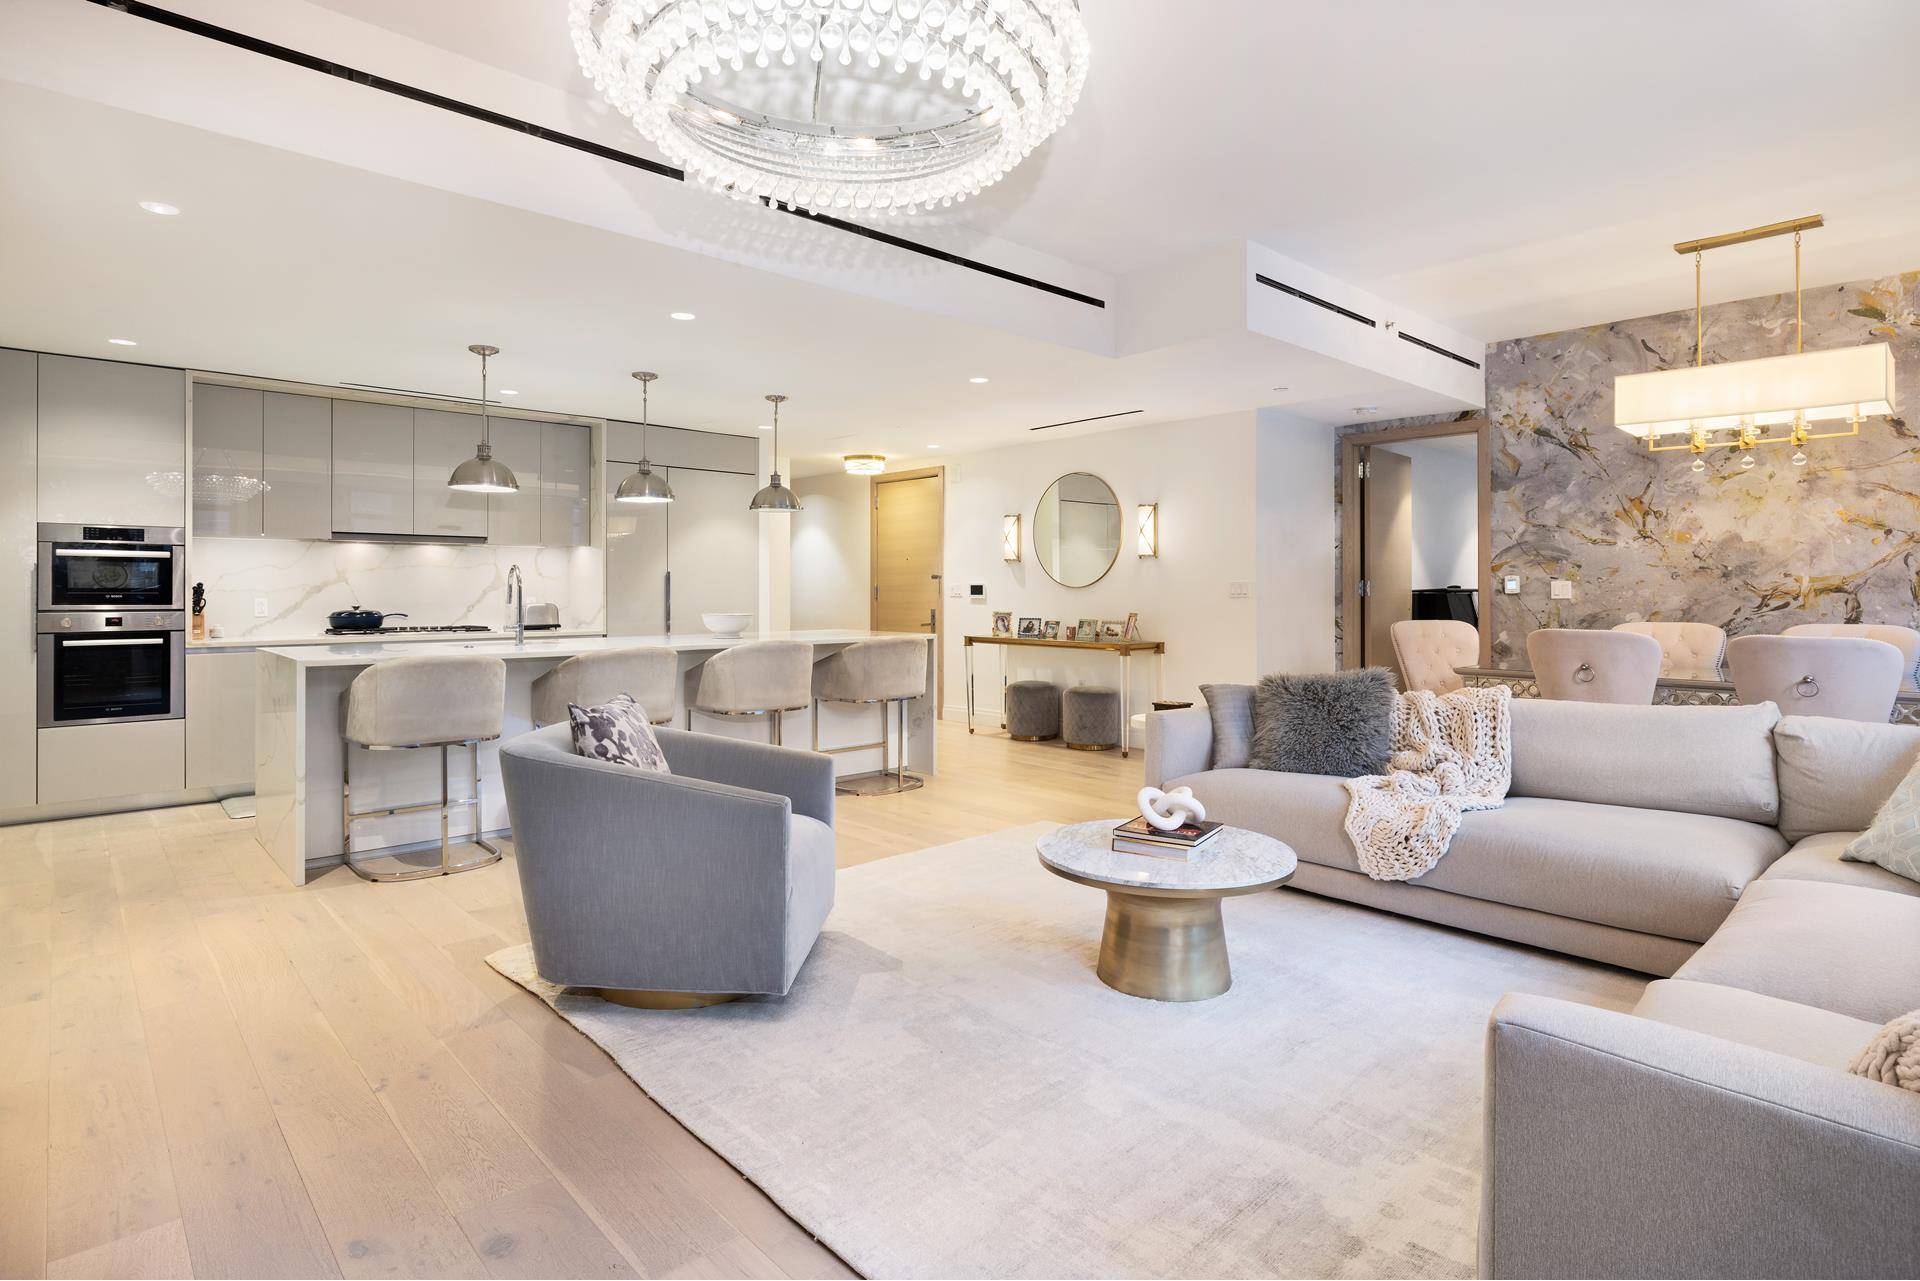 Introducing Apartment 3B at 212 West 95th Street, a sophisticated four bedroom residence that seamlessly blends modern elegance with thoughtful design.